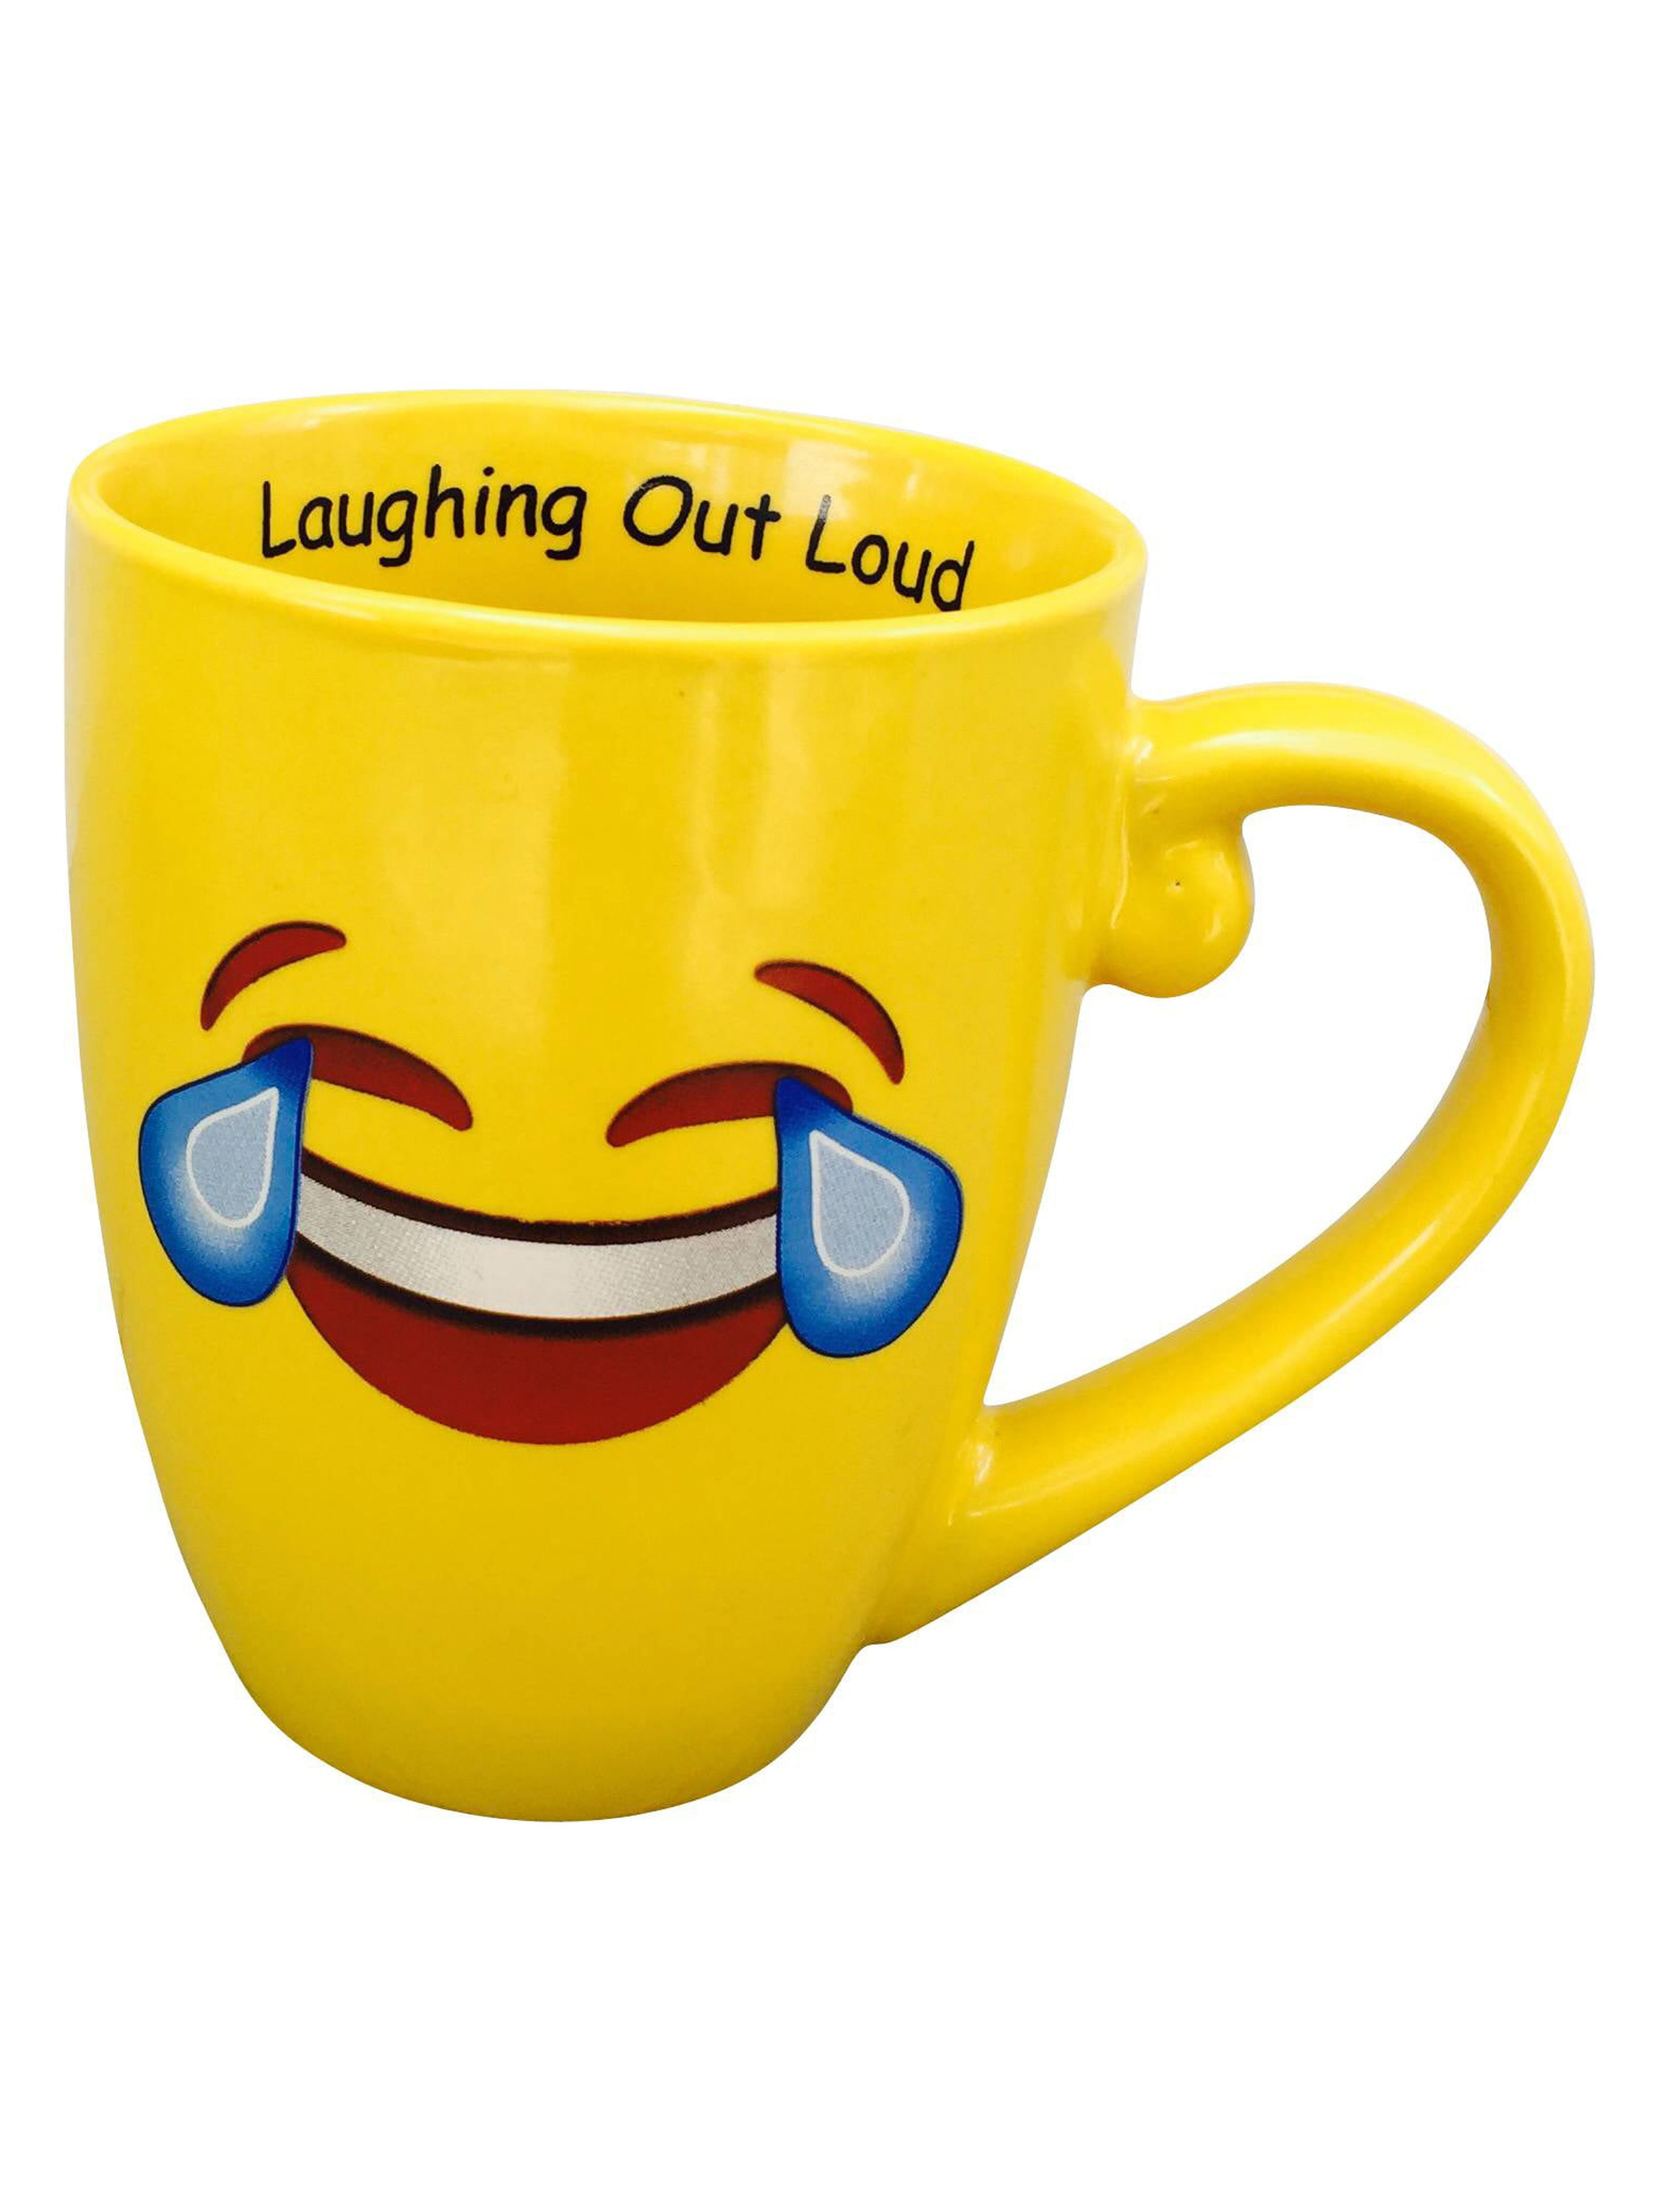 LOL – Laughing Out Loud